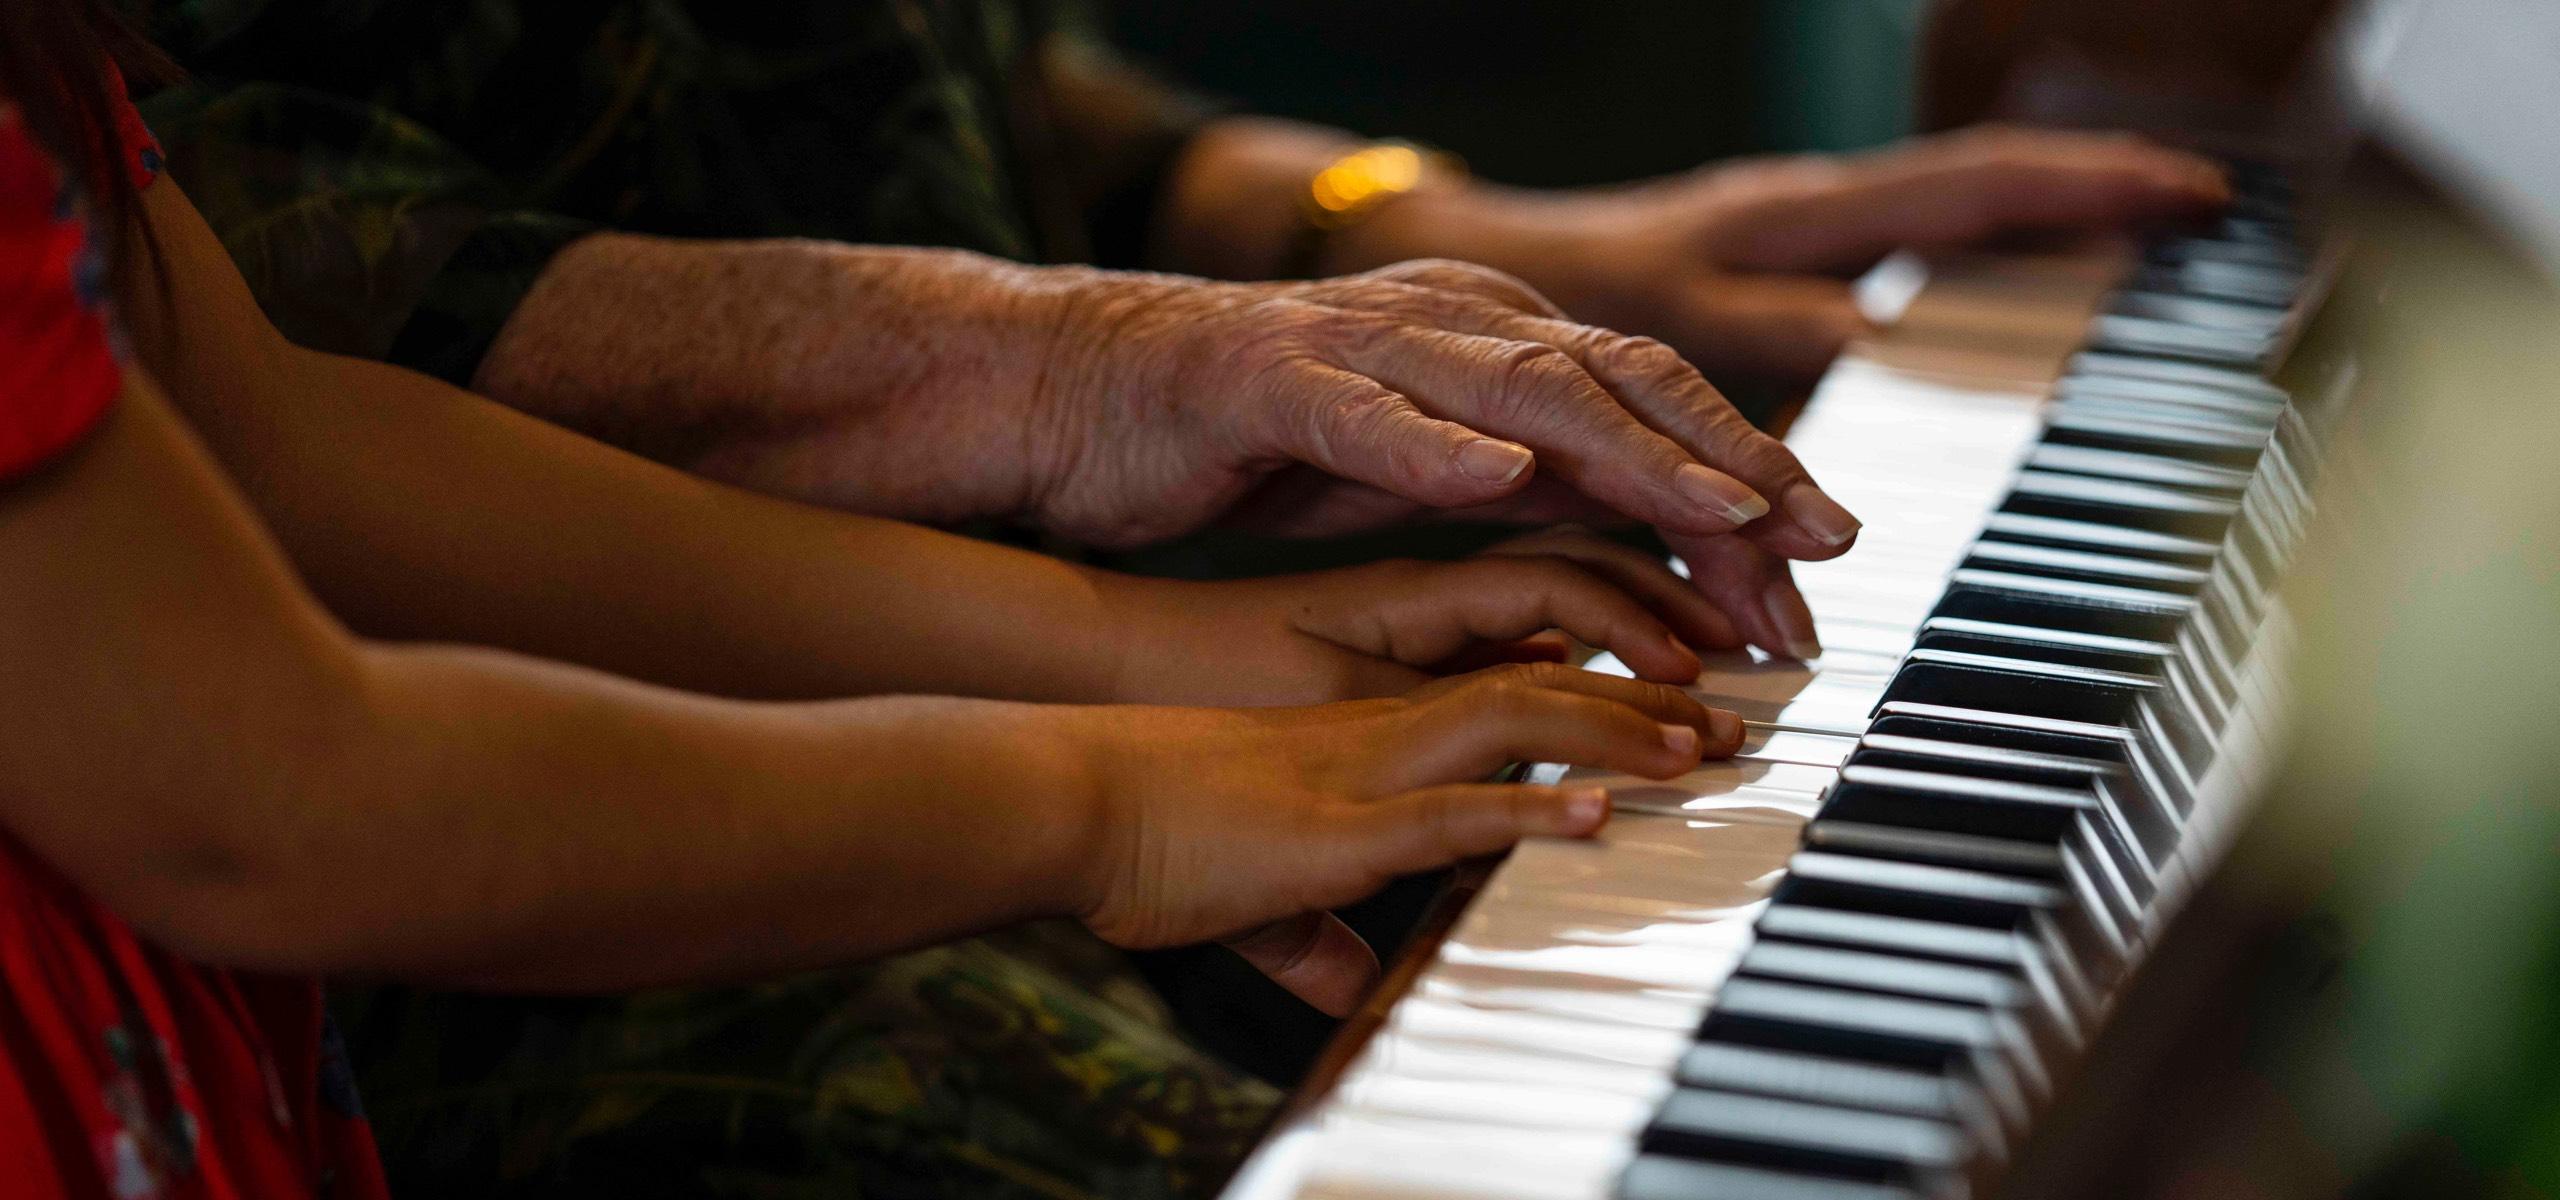 Oceania residents playing piano together